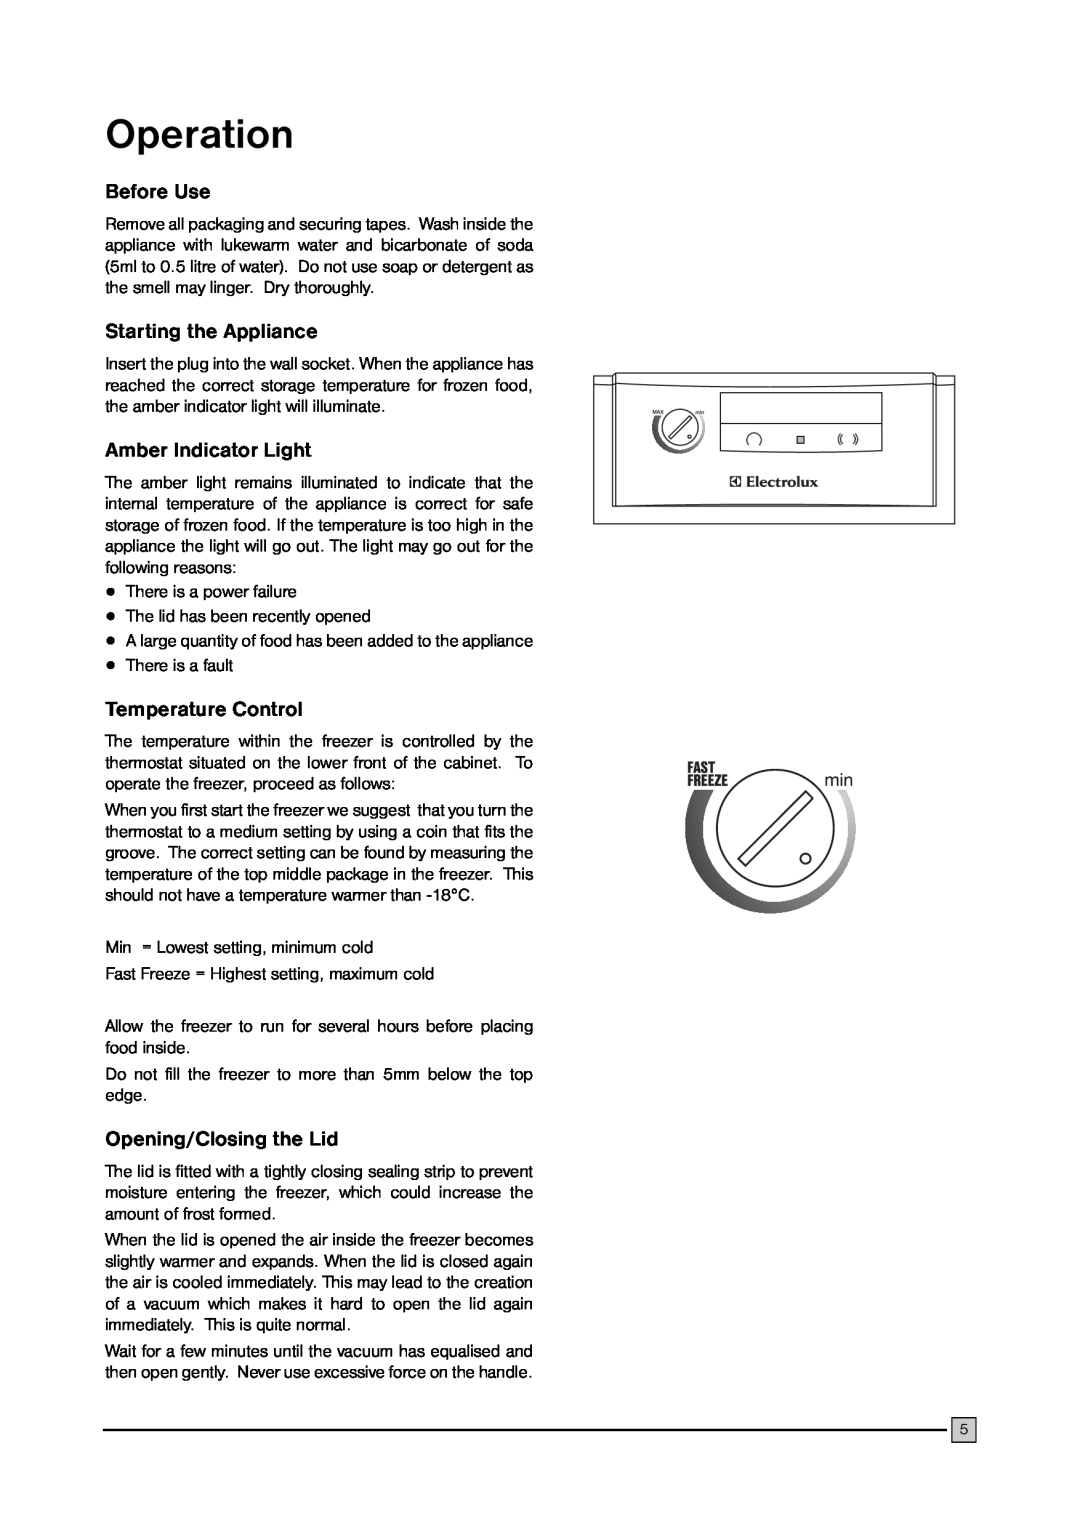 Electrolux ECN 2757 manual Operation, Before Use, Starting the Appliance, Amber Indicator Light, Temperature Control 